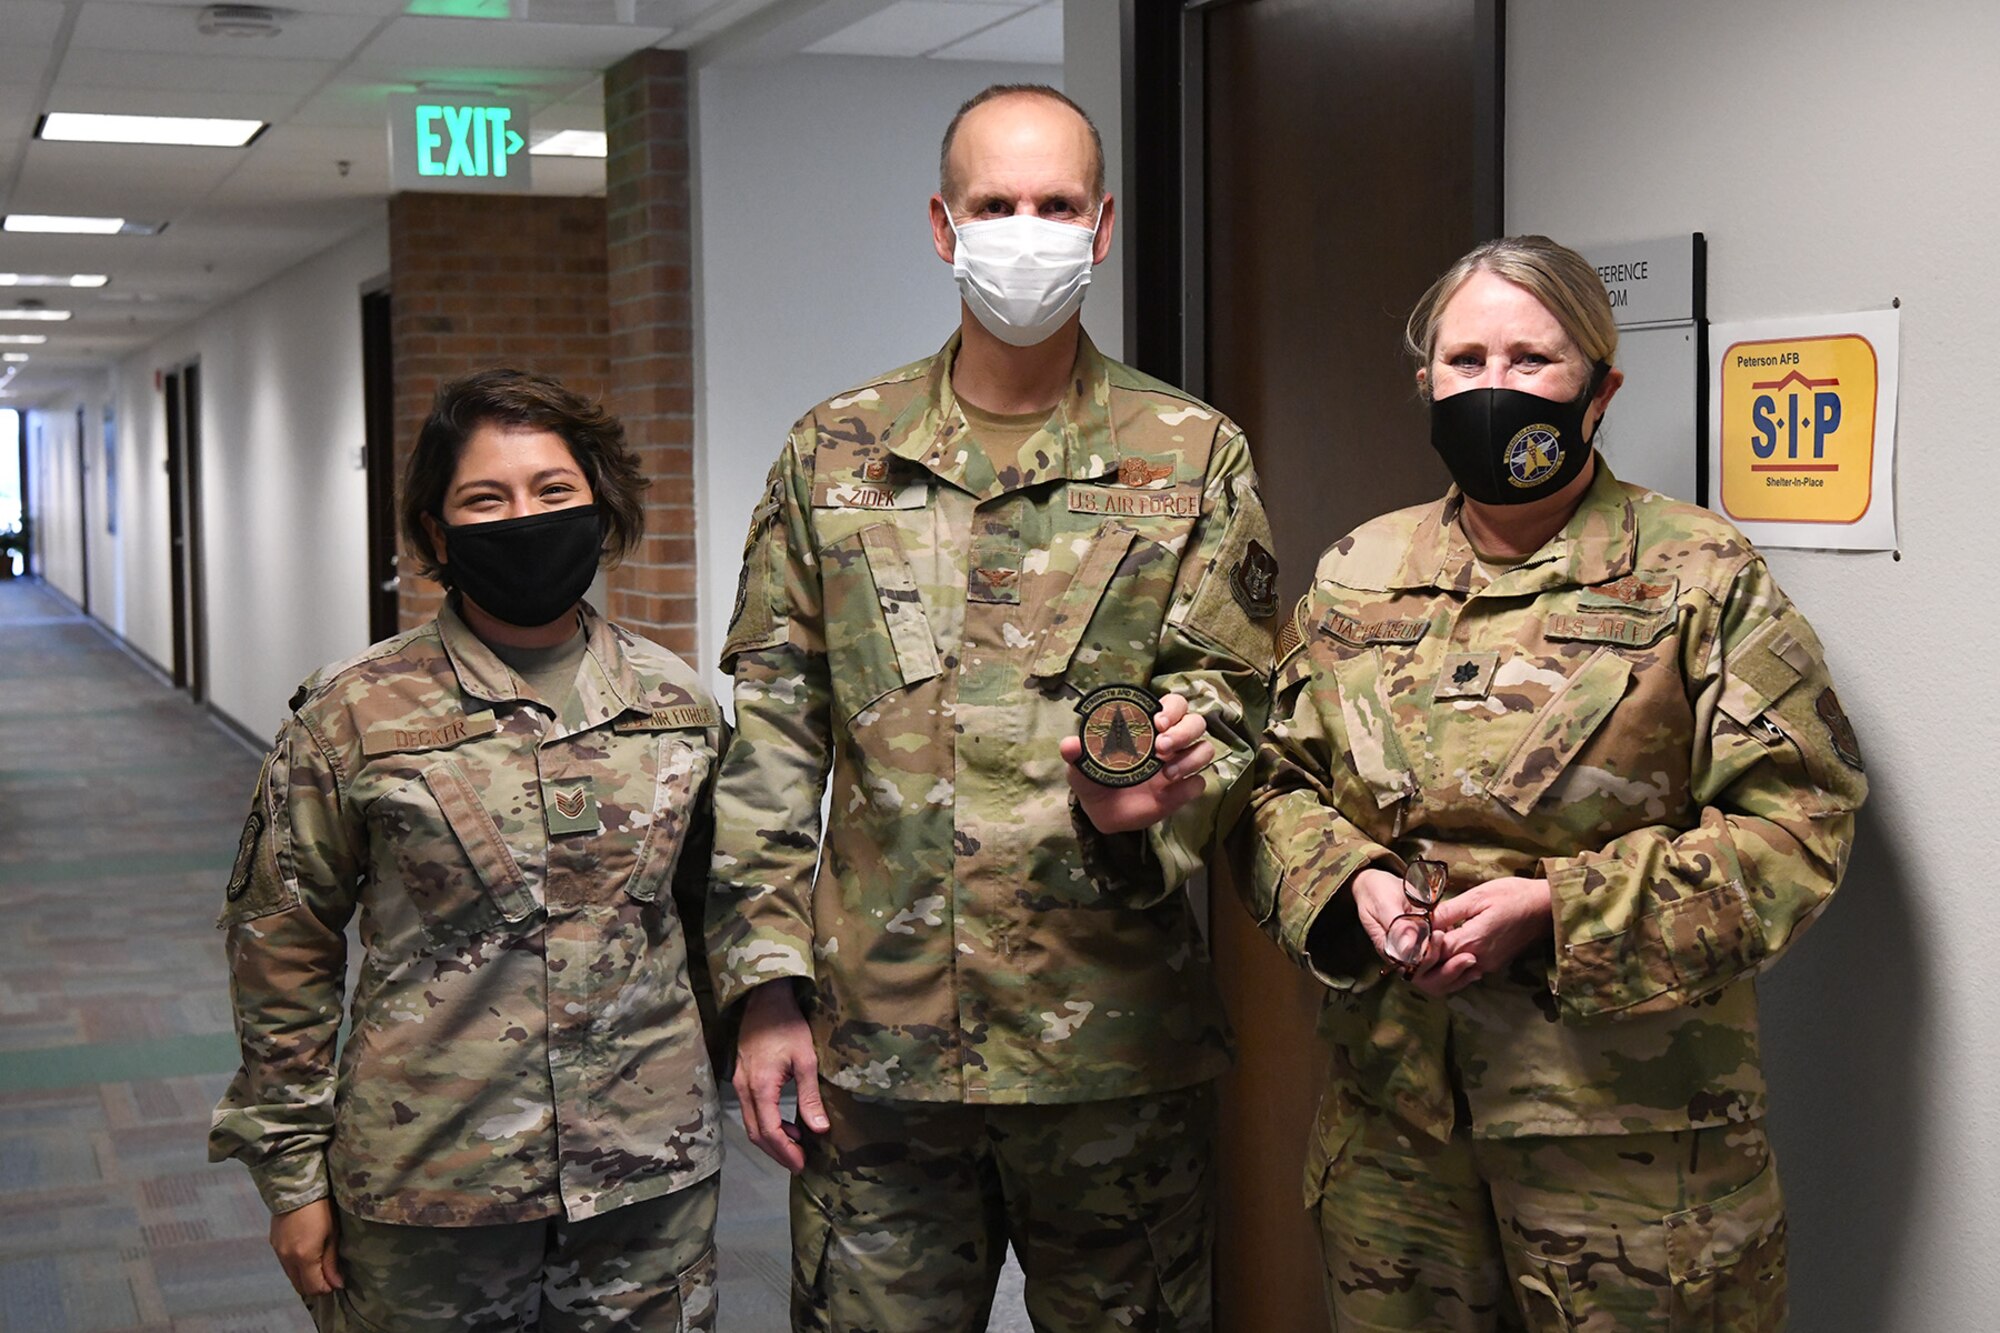 Lt. Col. Kimberly MacPherson (right), 34th Aeromedical Evacuation Squadron commander, and Tech. Sgt. Diane Decker, 34 AES medical administration Air Reserve Technician, present Col. Christopher Zidek, 302nd Airlift Wing commander, a squadron patch during his visit with the 34 AES, Dec. 6, 2020, at Peterson-Schriever Garrison, Colorado